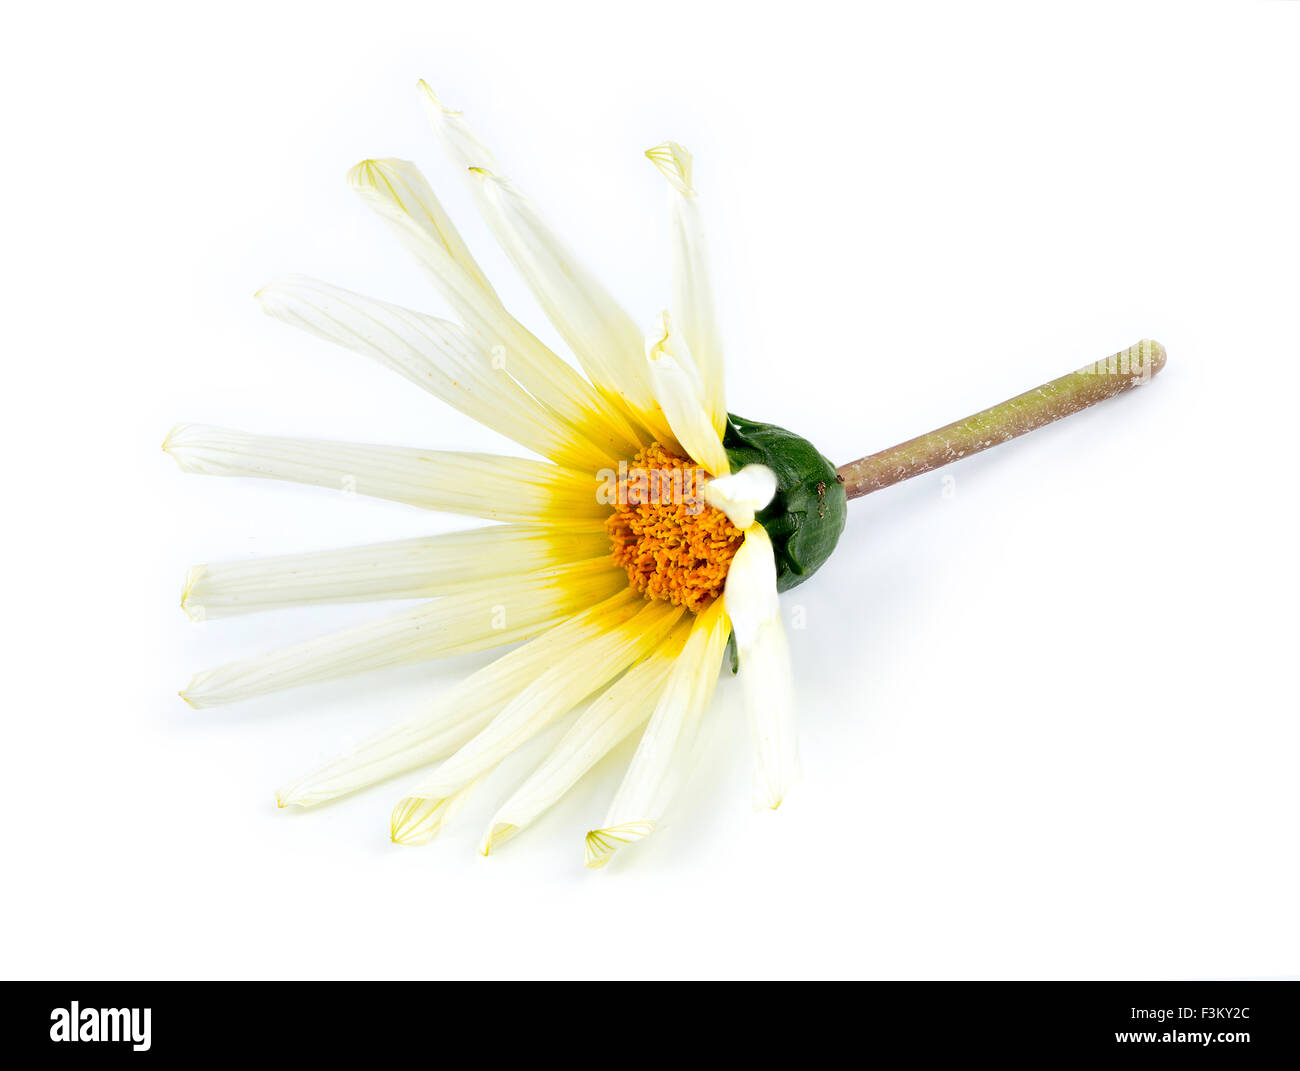 Orange, white, yellow and green Asteraceae daisy flower against white background Stock Photo